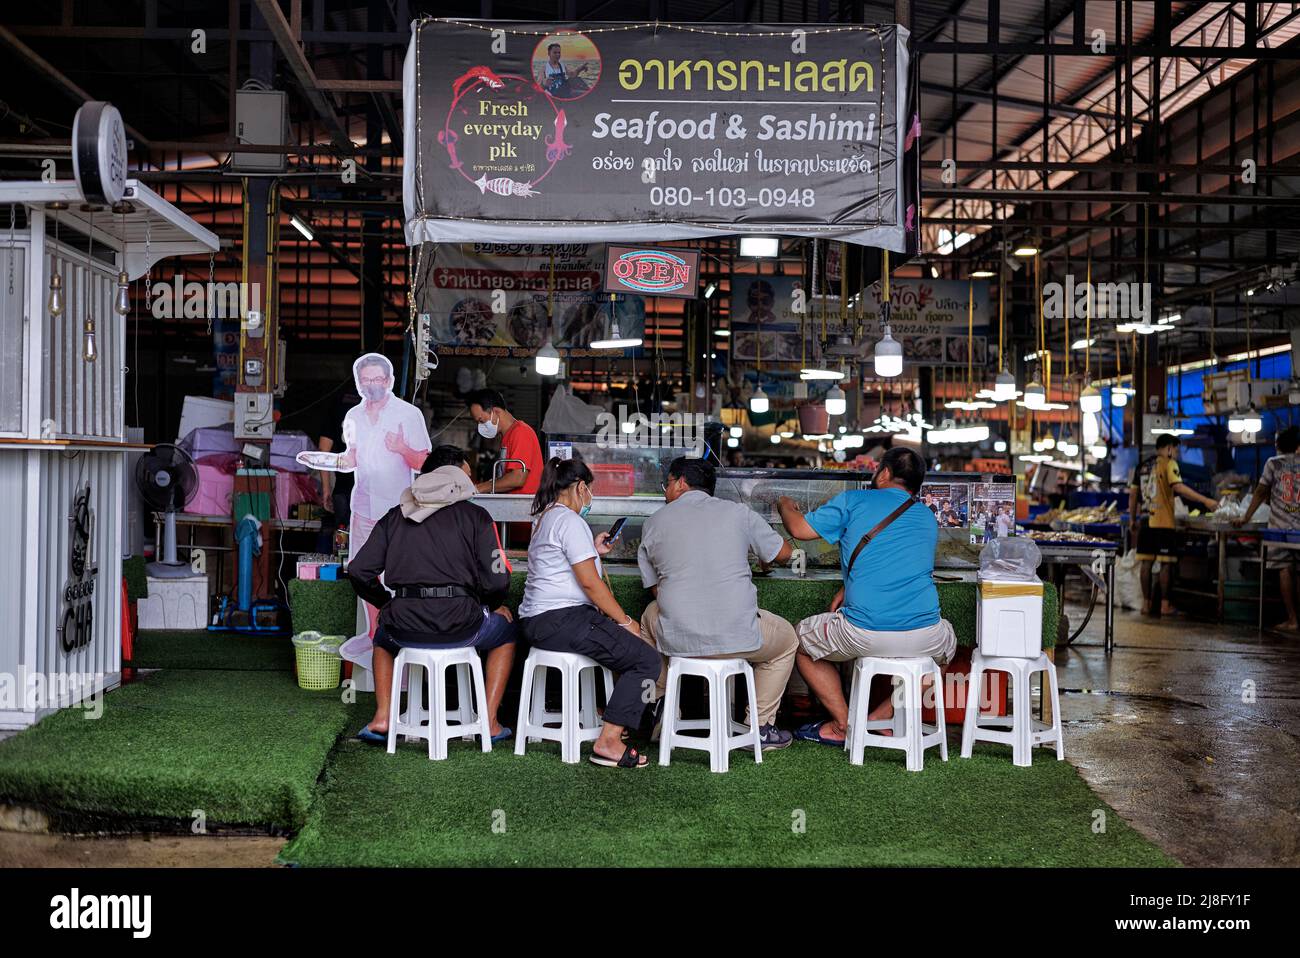 People eating outdoor at a Thailand seafood market stall. Southeast Asia Stock Photo